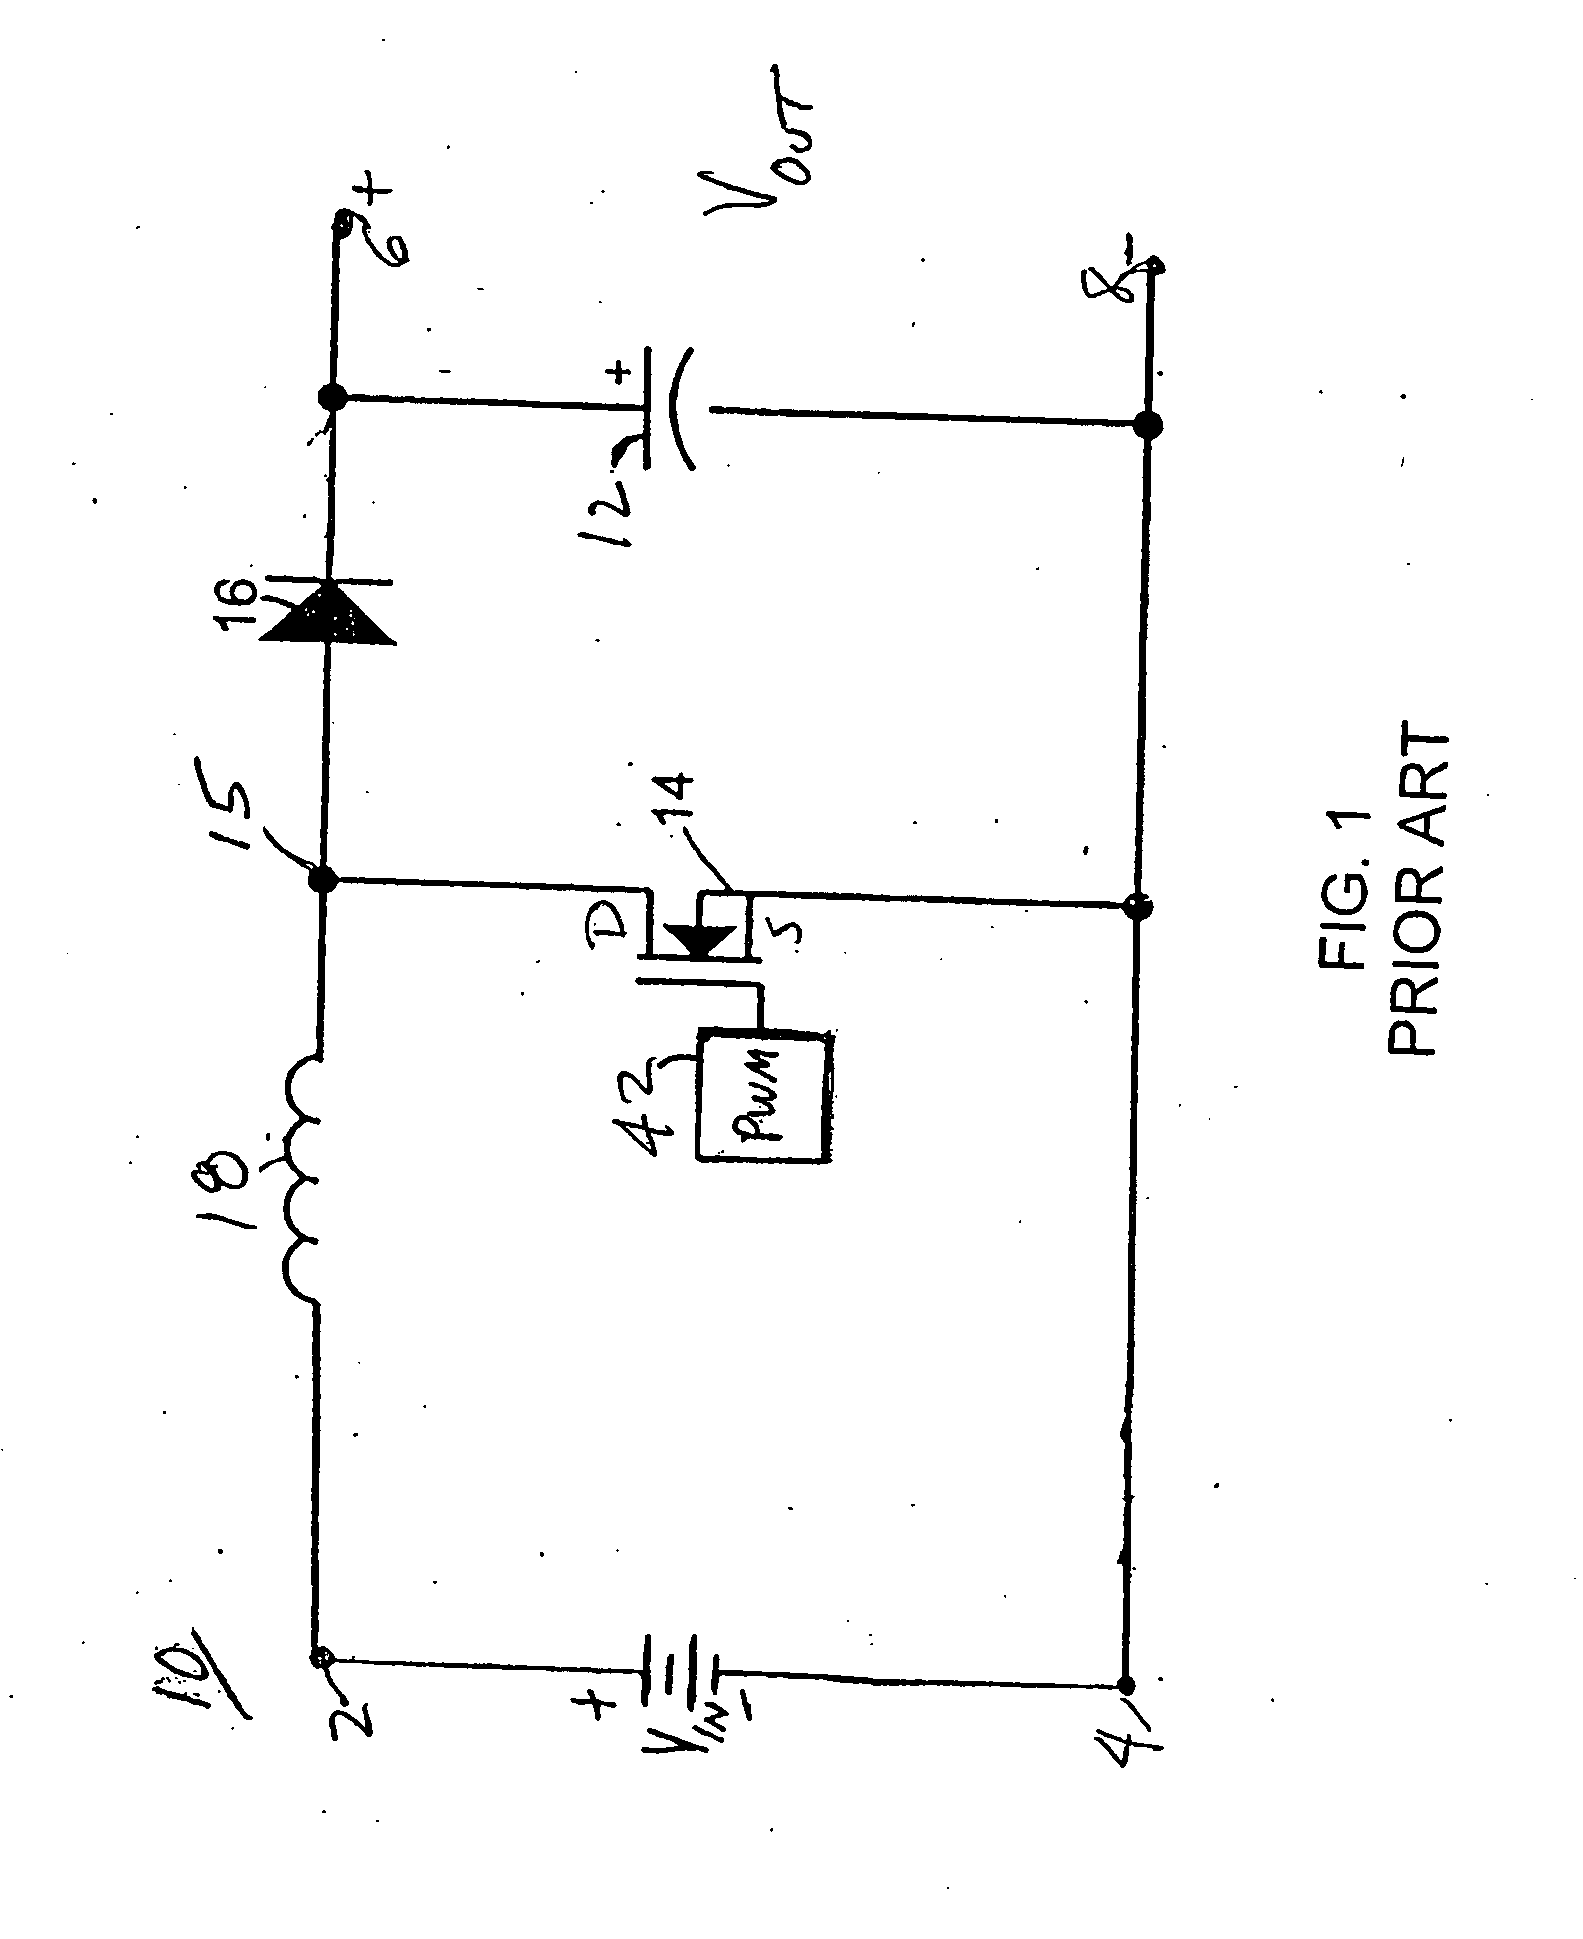 Snubber circuit for a power converter